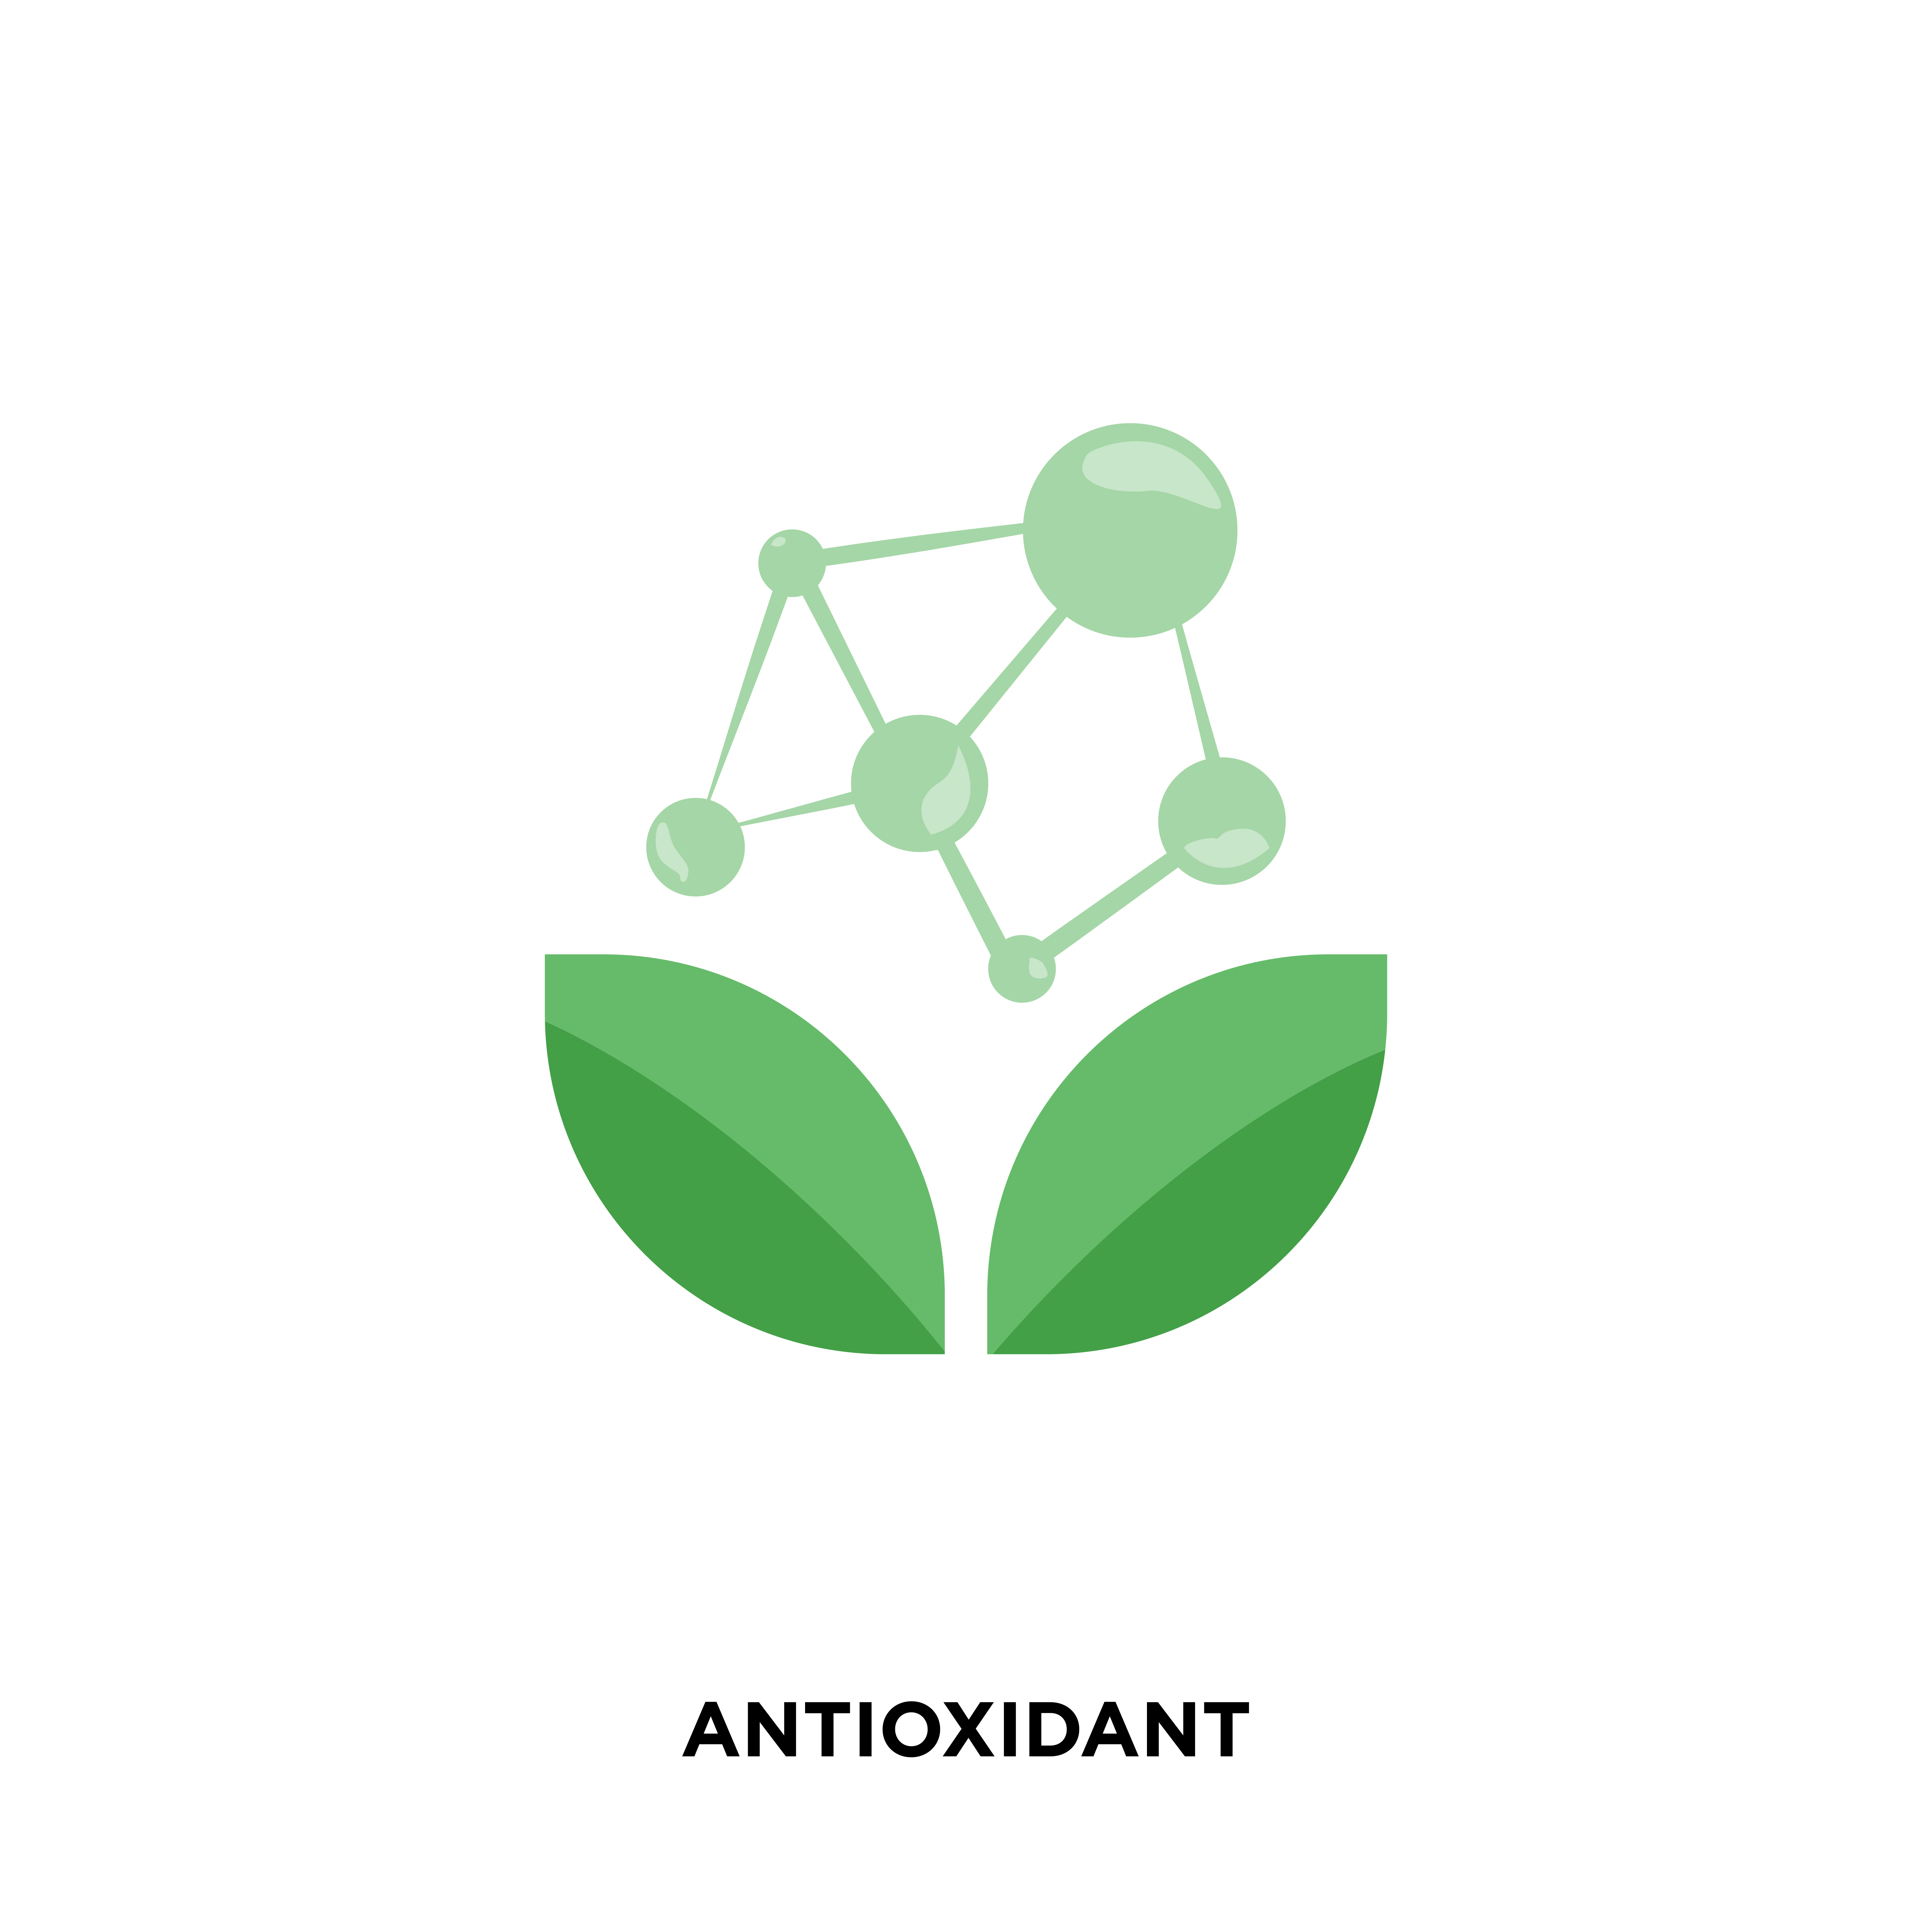 what are antioxidants